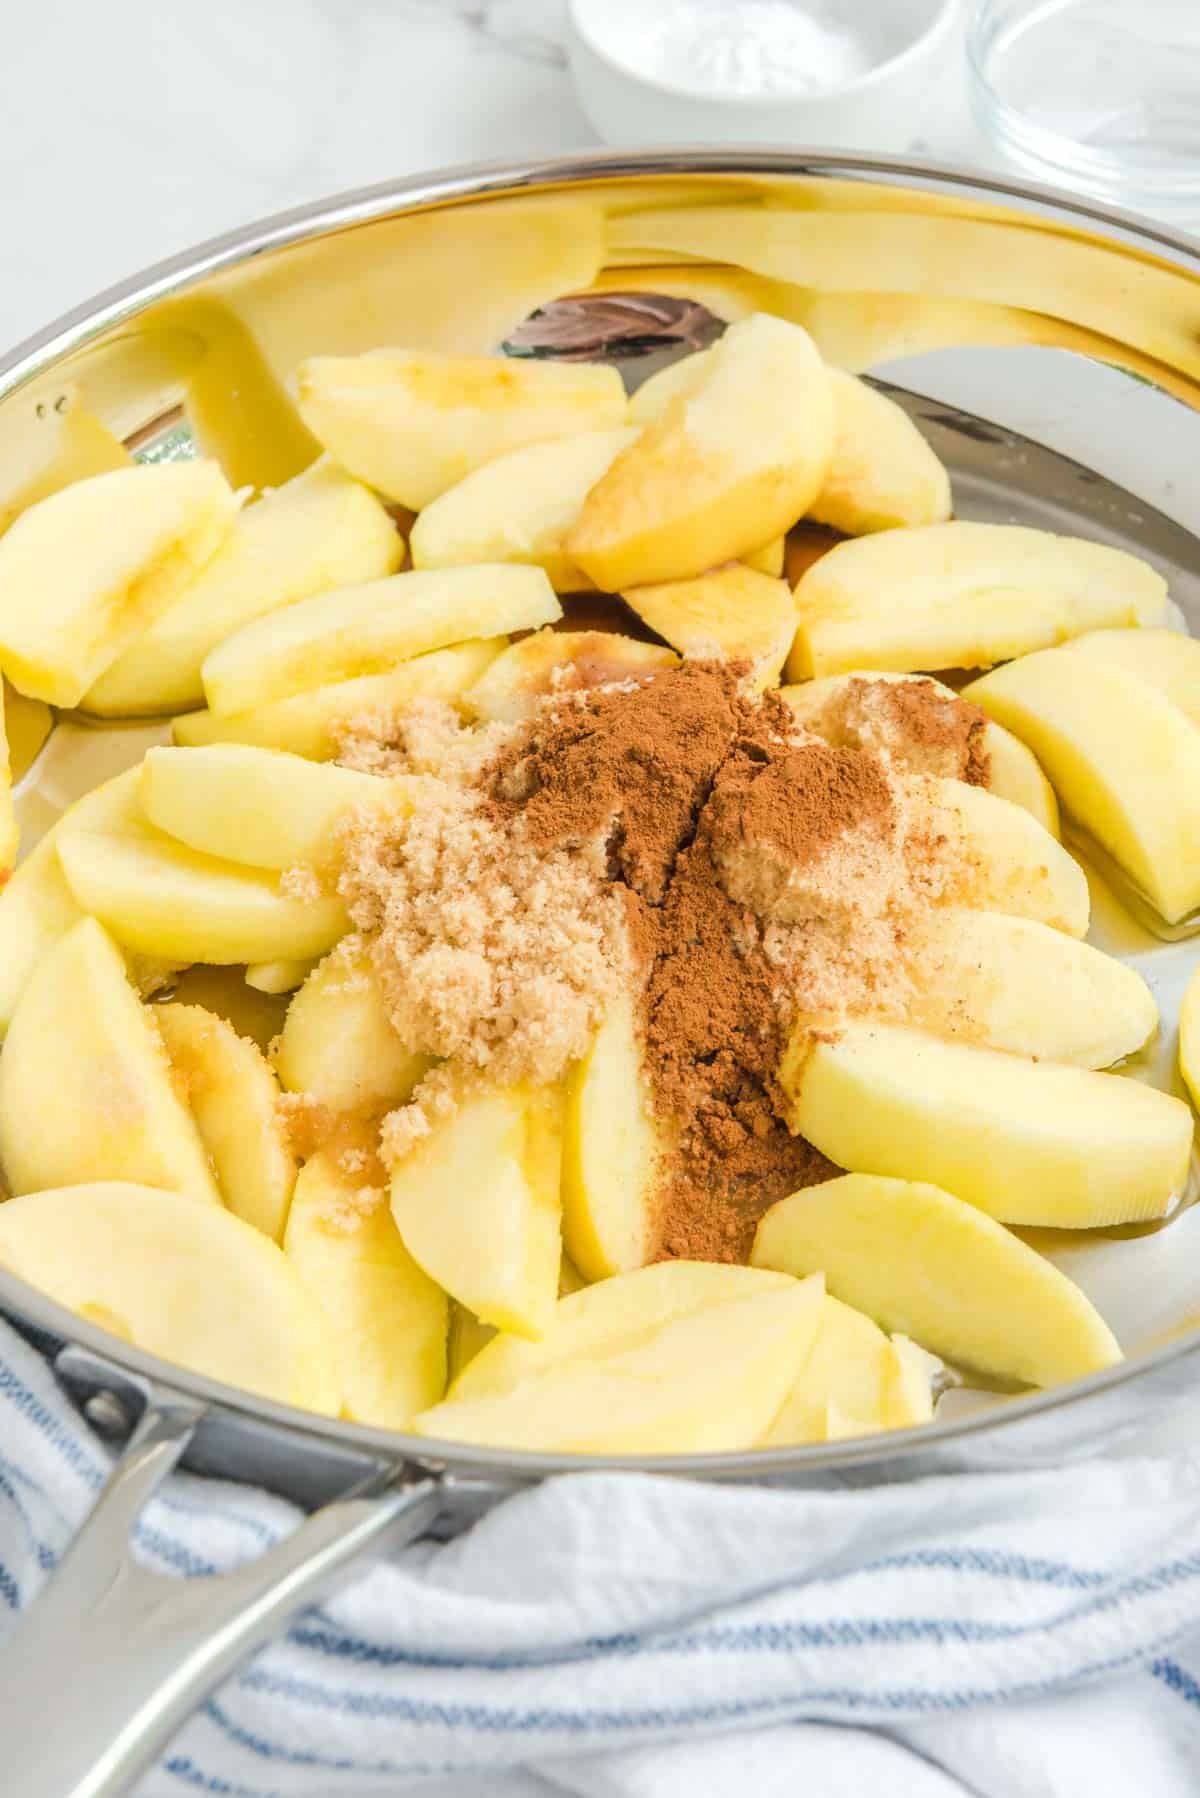 raw sliced apples with cinnamon and brown sugar in saucepan